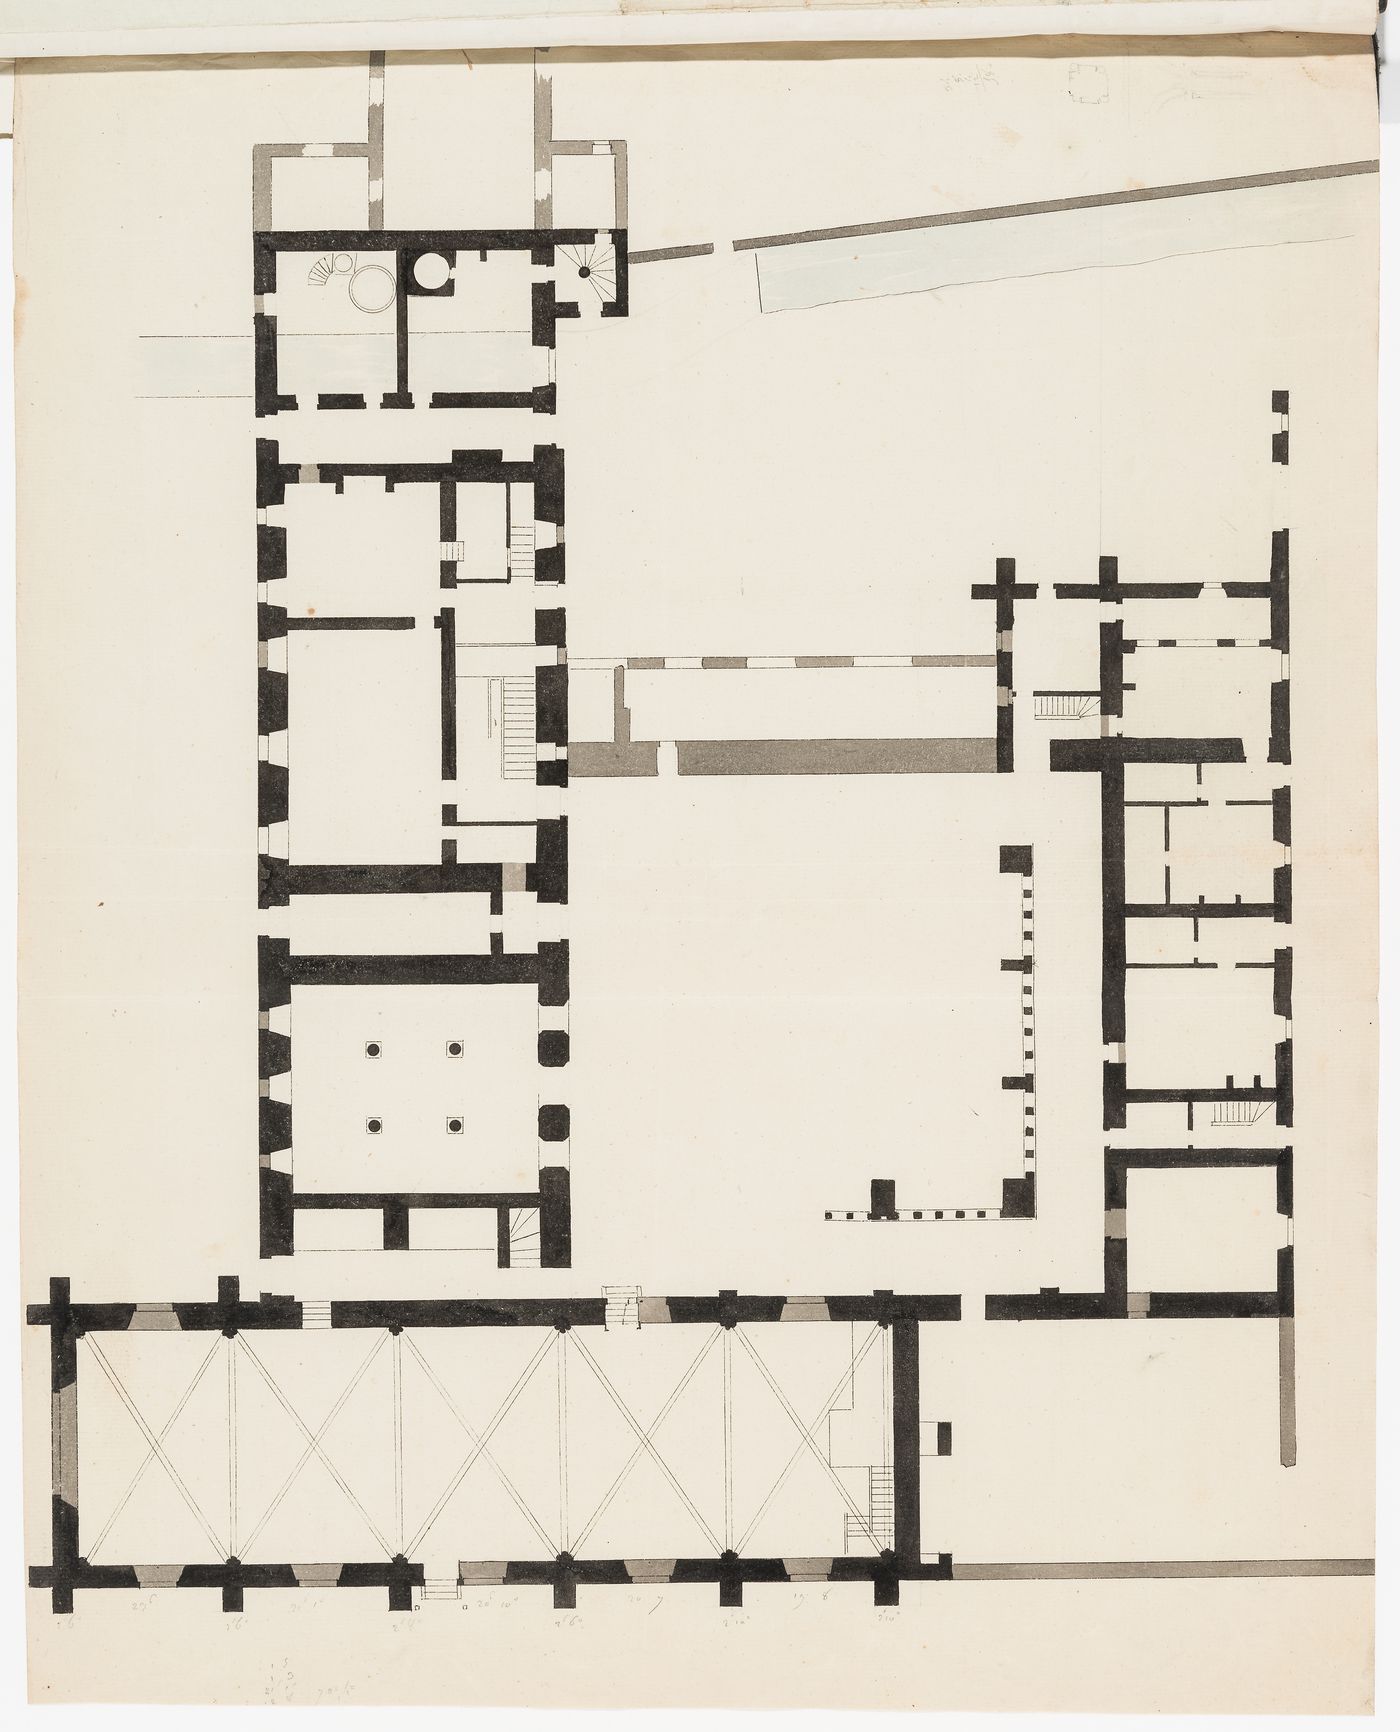 Ground floor plan of the house and adjacent outbuildings, Domaine de La Vallée; verso: Preliminary sketches including a site plan, plans and elevations for the house and outbuildings, Domaine de La Vallée